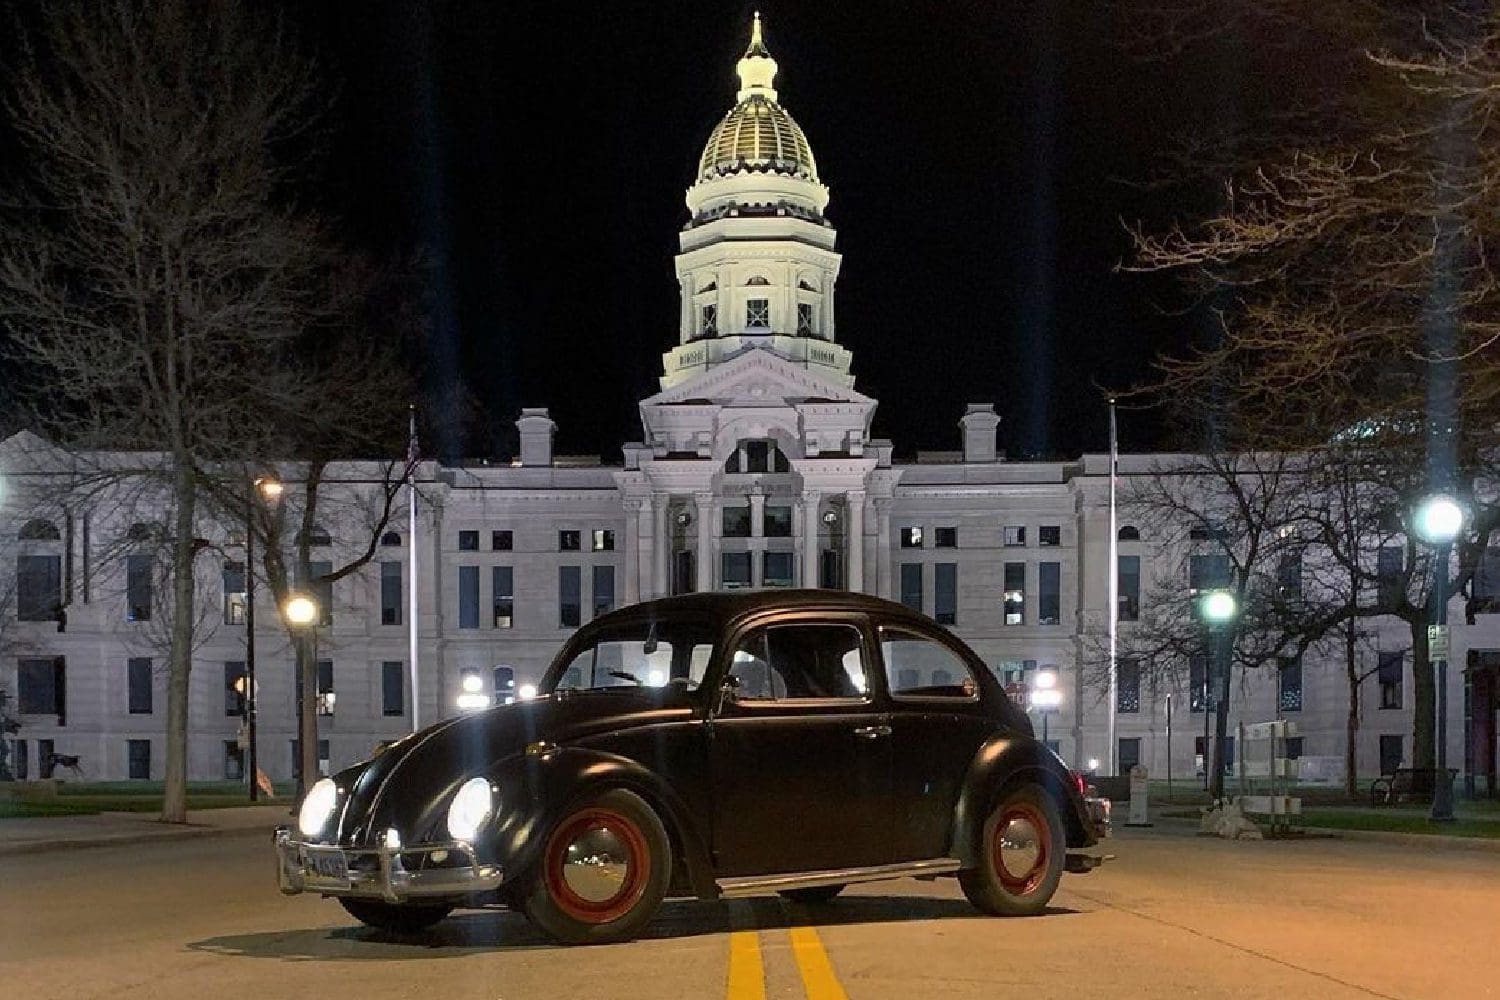 1964 VW Bug in front of Wyoming state capital